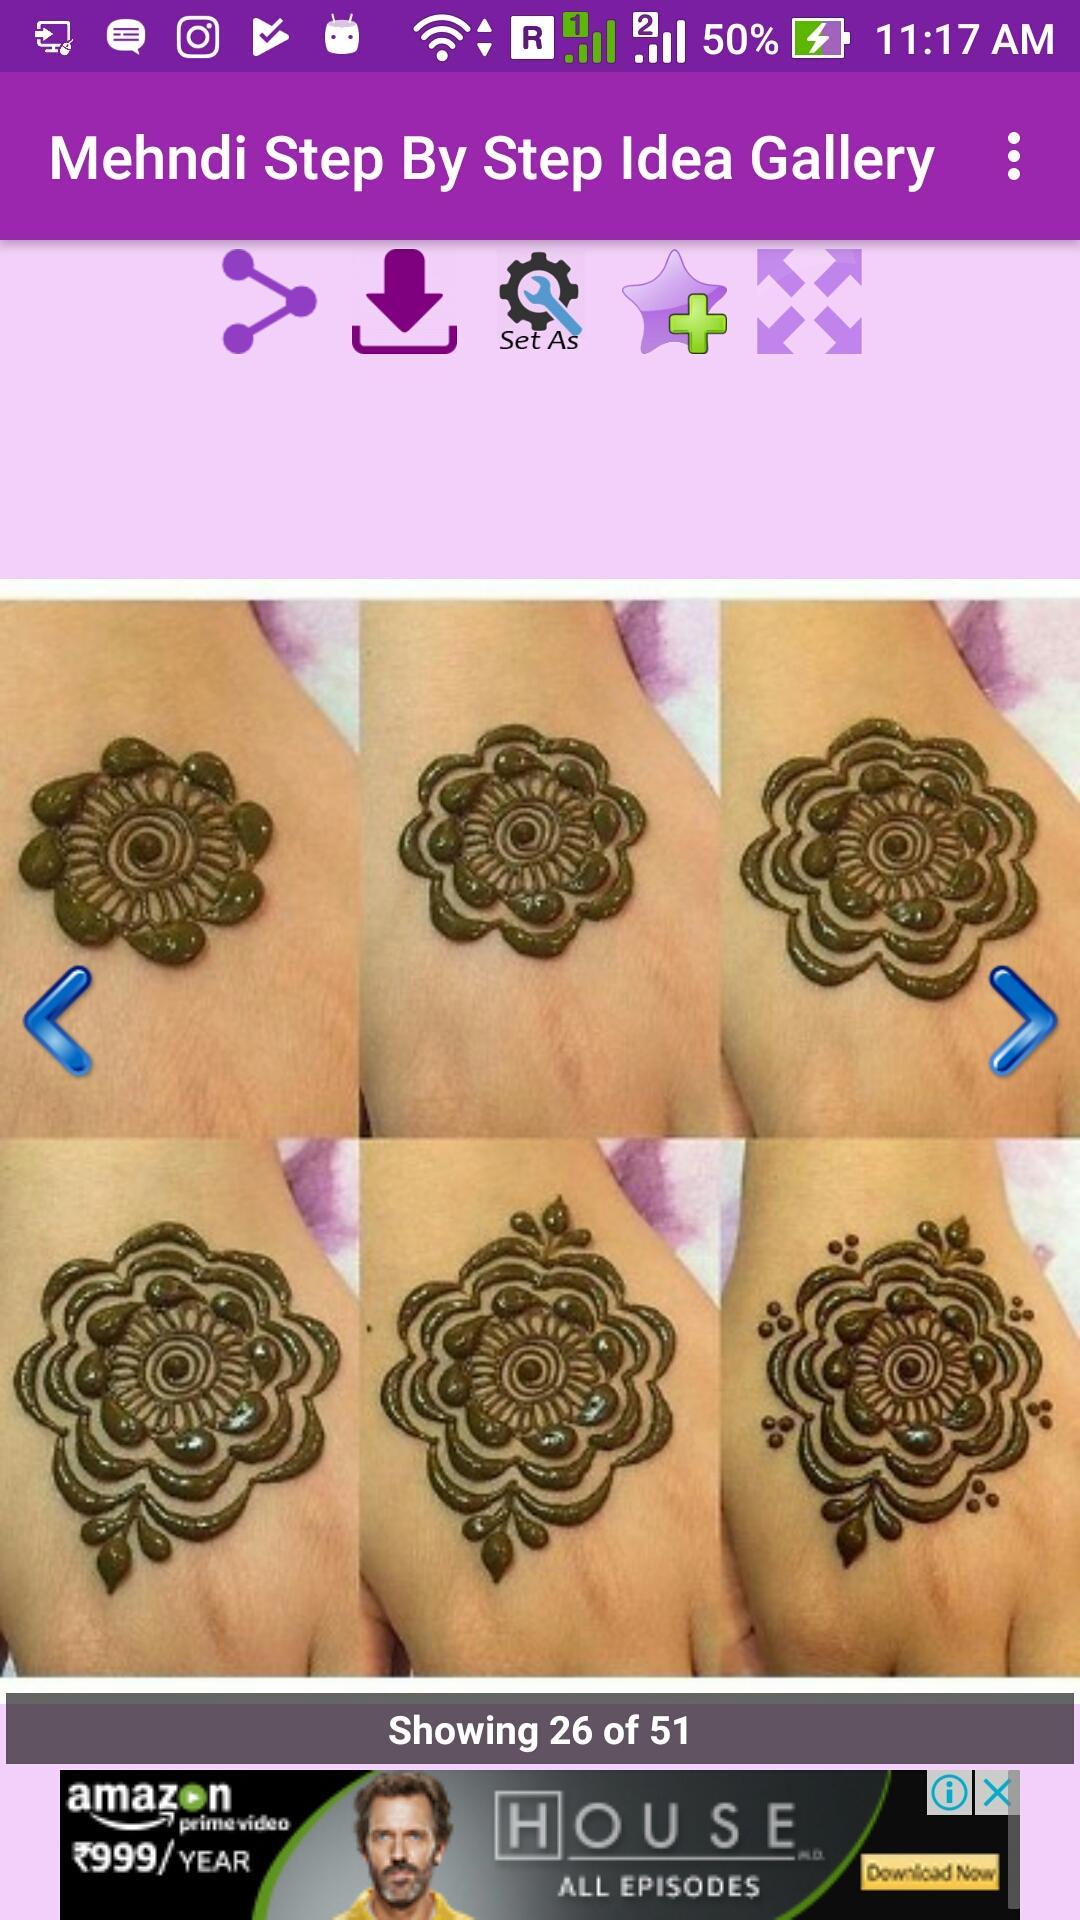 Mehandi Step By Step Idea Gallery for Android - APK Download